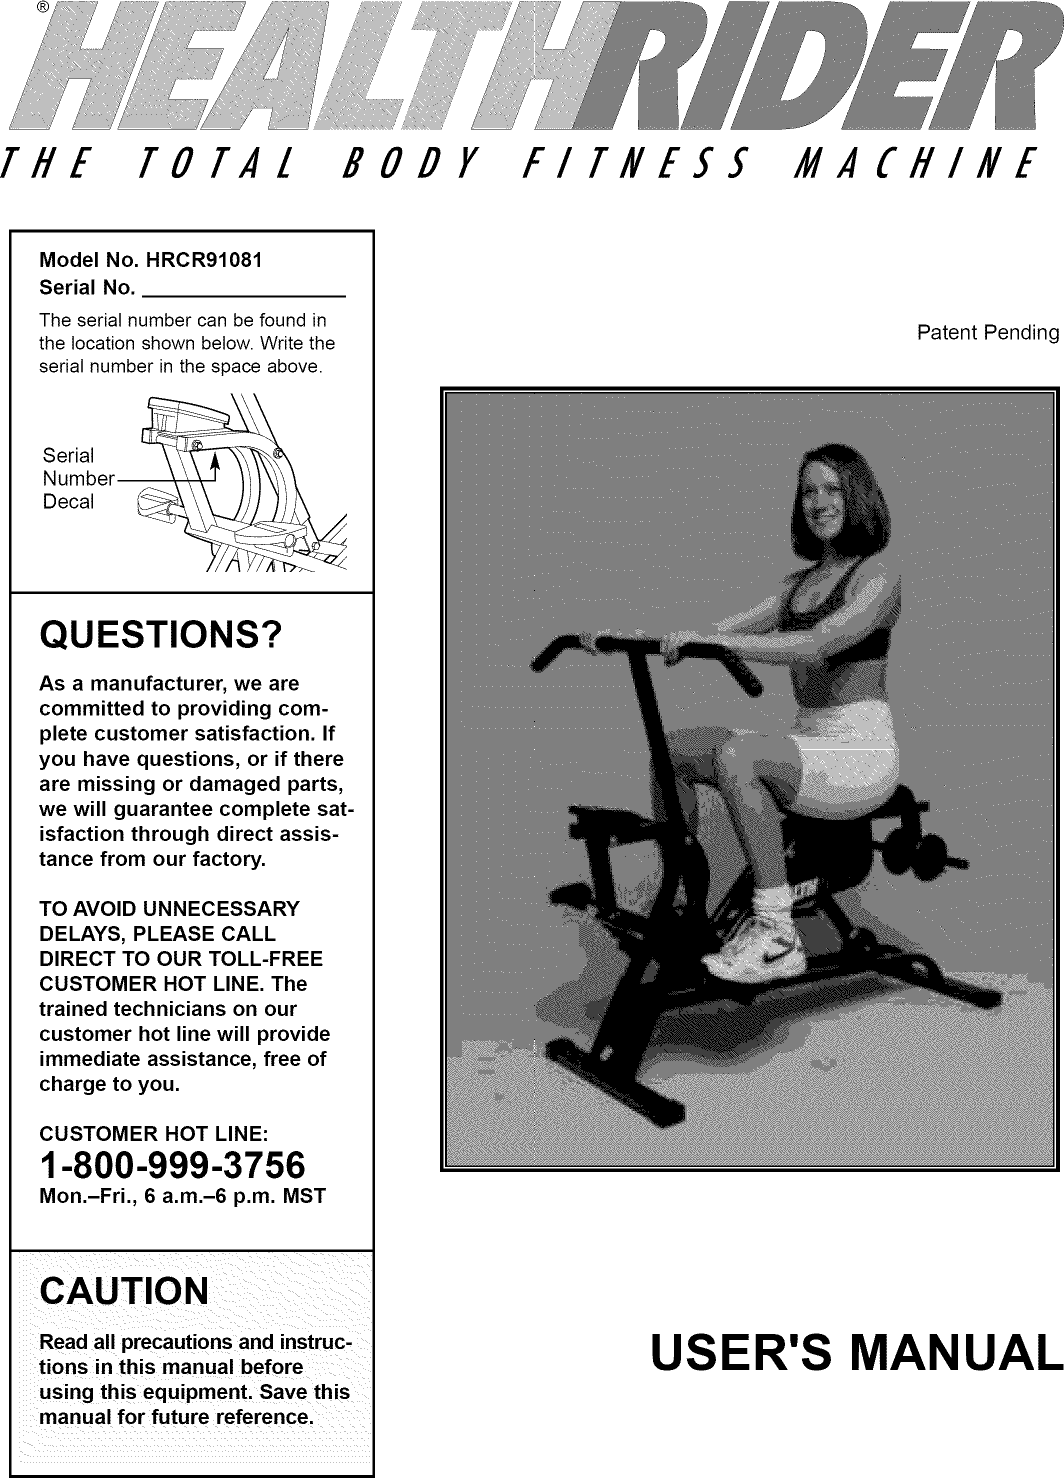 Page 1 of 12 - Healthrider HRCR91081 User Manual  TOTAL BODY FITNESS - Manuals And Guides 1309391L